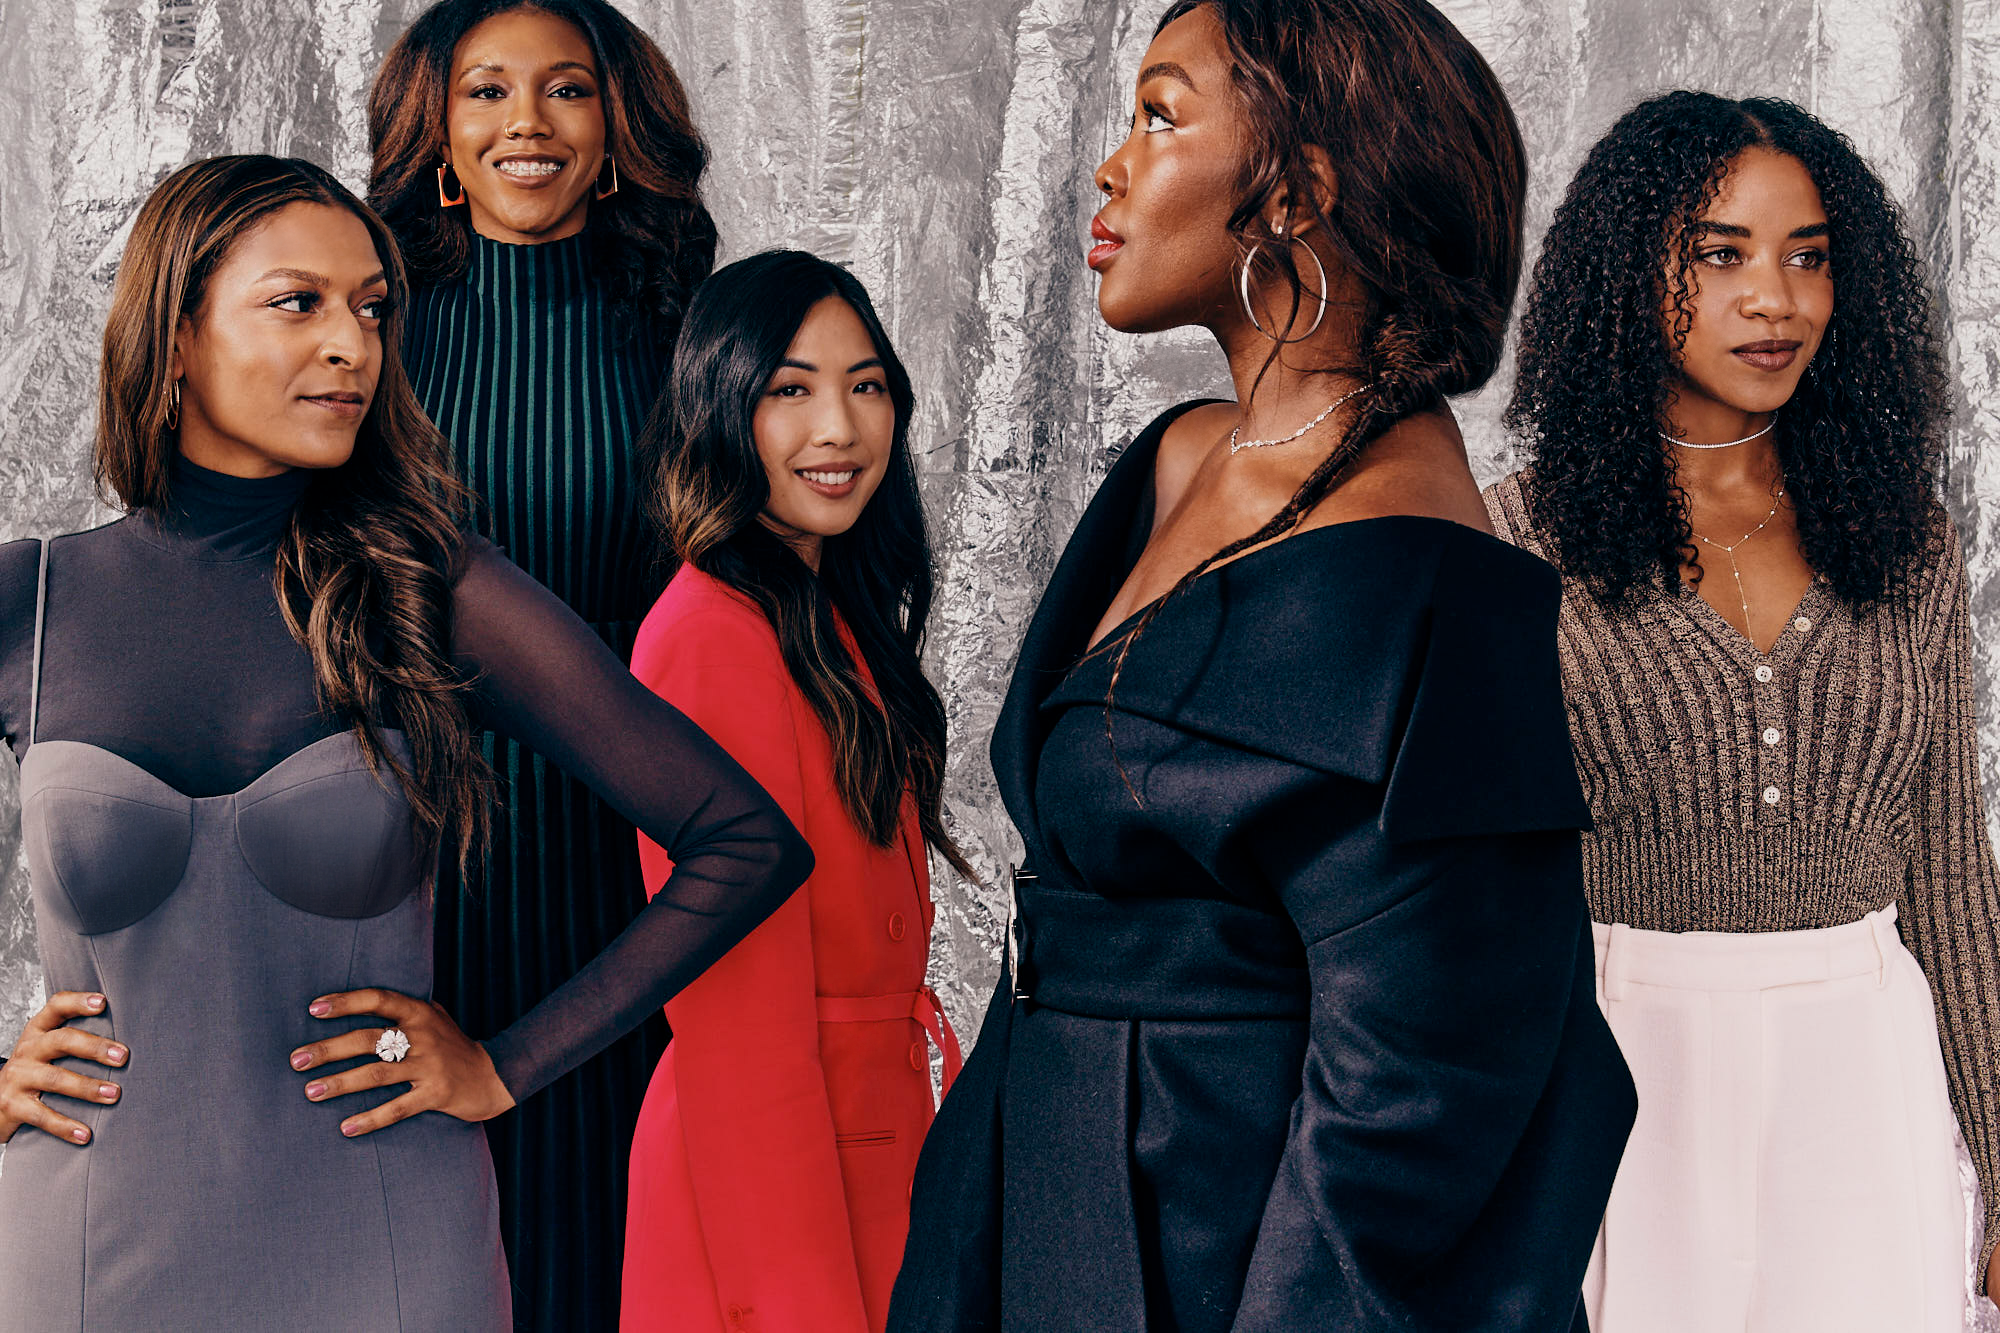 Now Introducing The Women of Color Making Major Waves in Corporate America